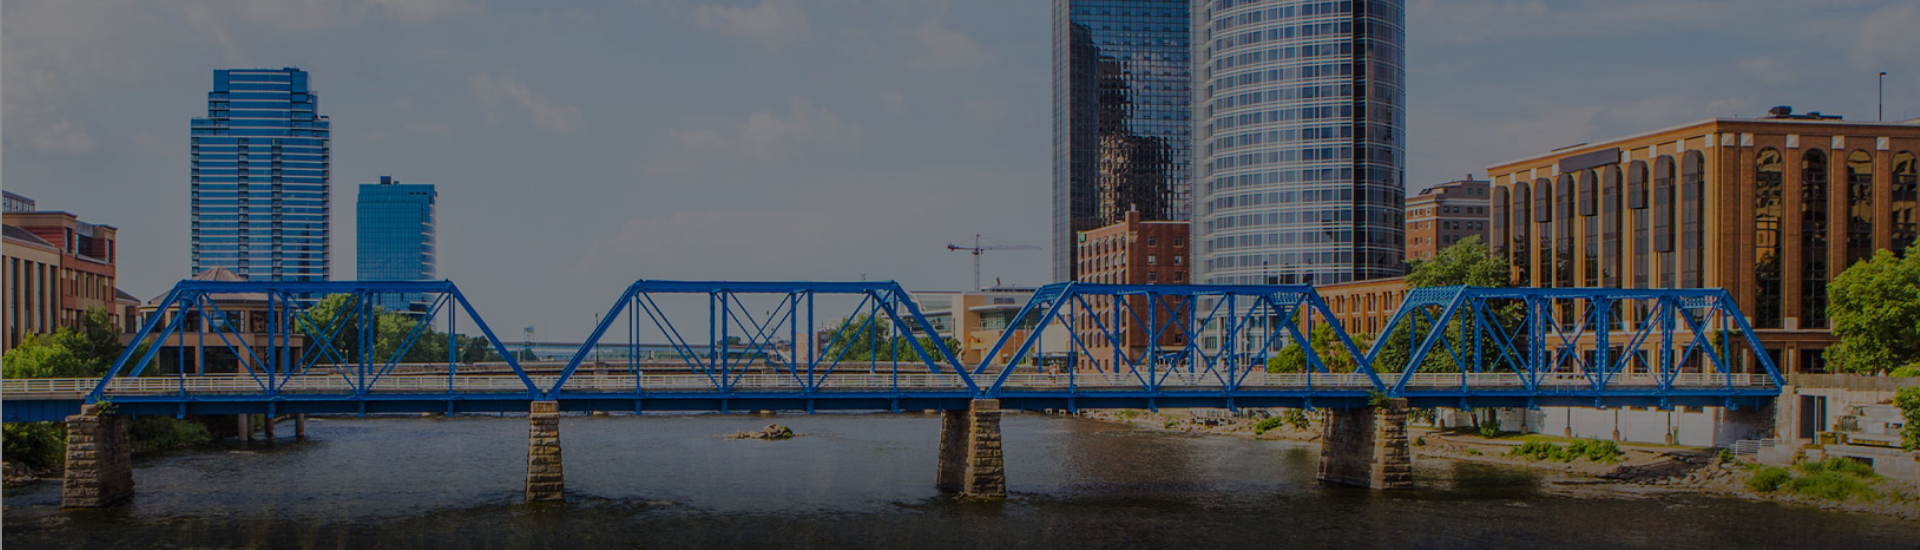 Cross Country Healthcare color photo of the Blue Bridge in front of the cityscape of Grand Rapids.          